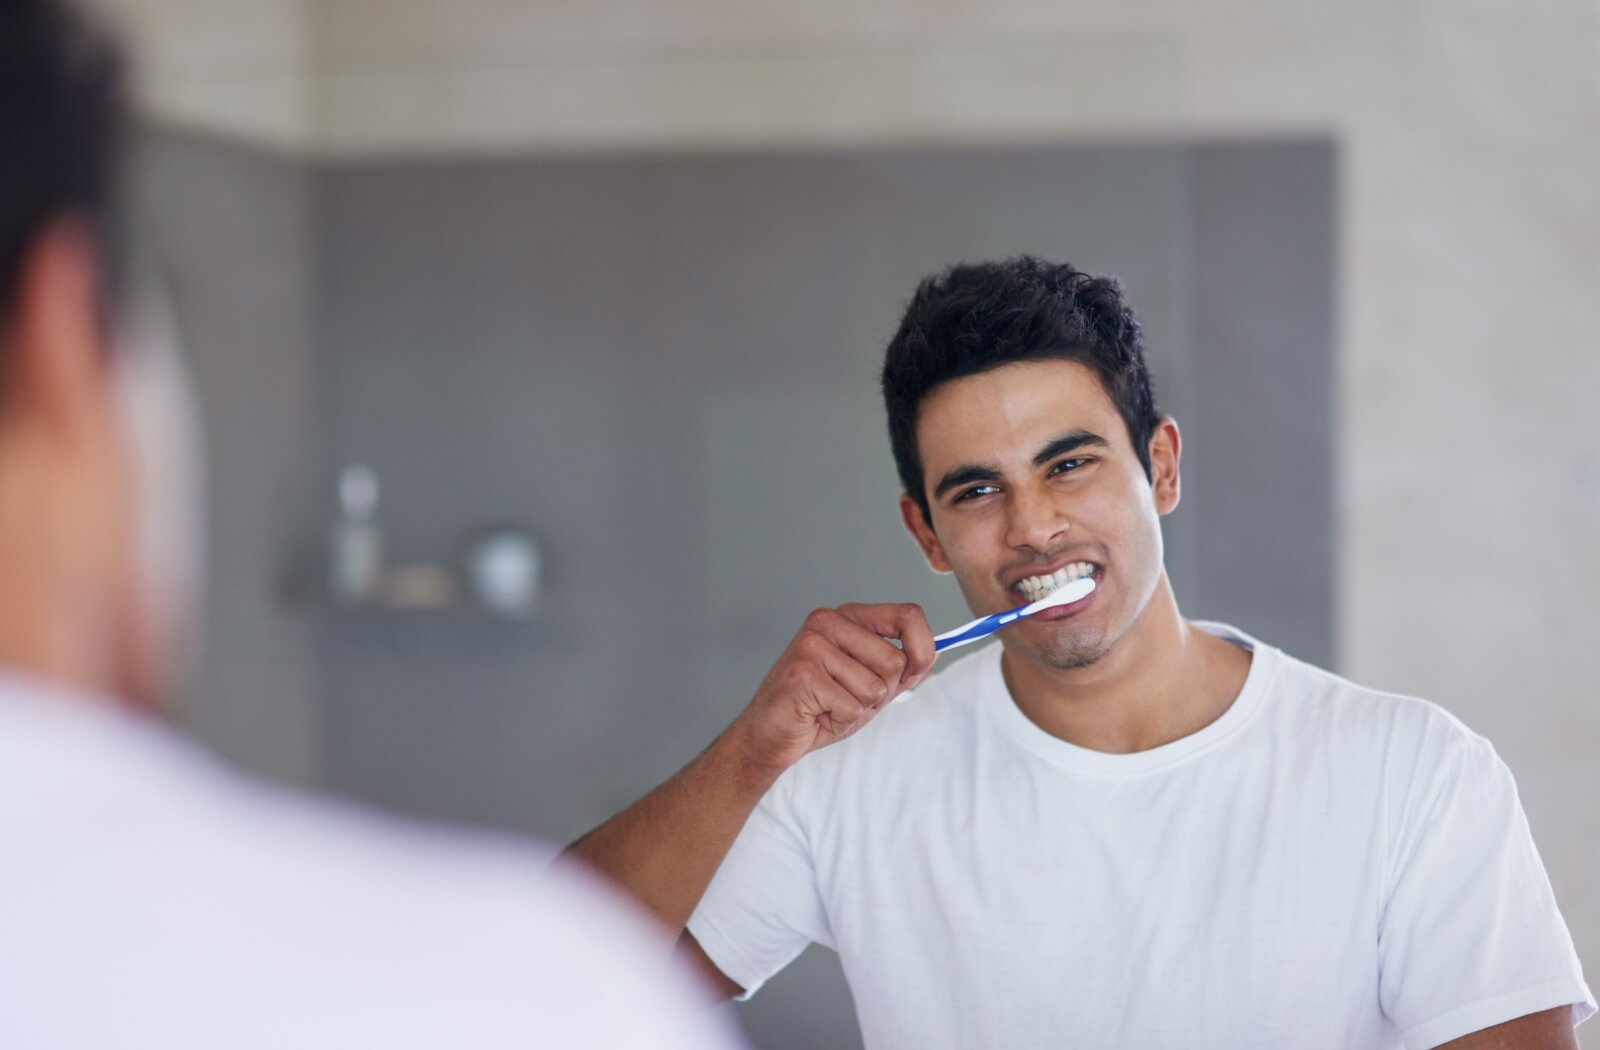 A man brushing his teeth in front of a large bathroom mirror.